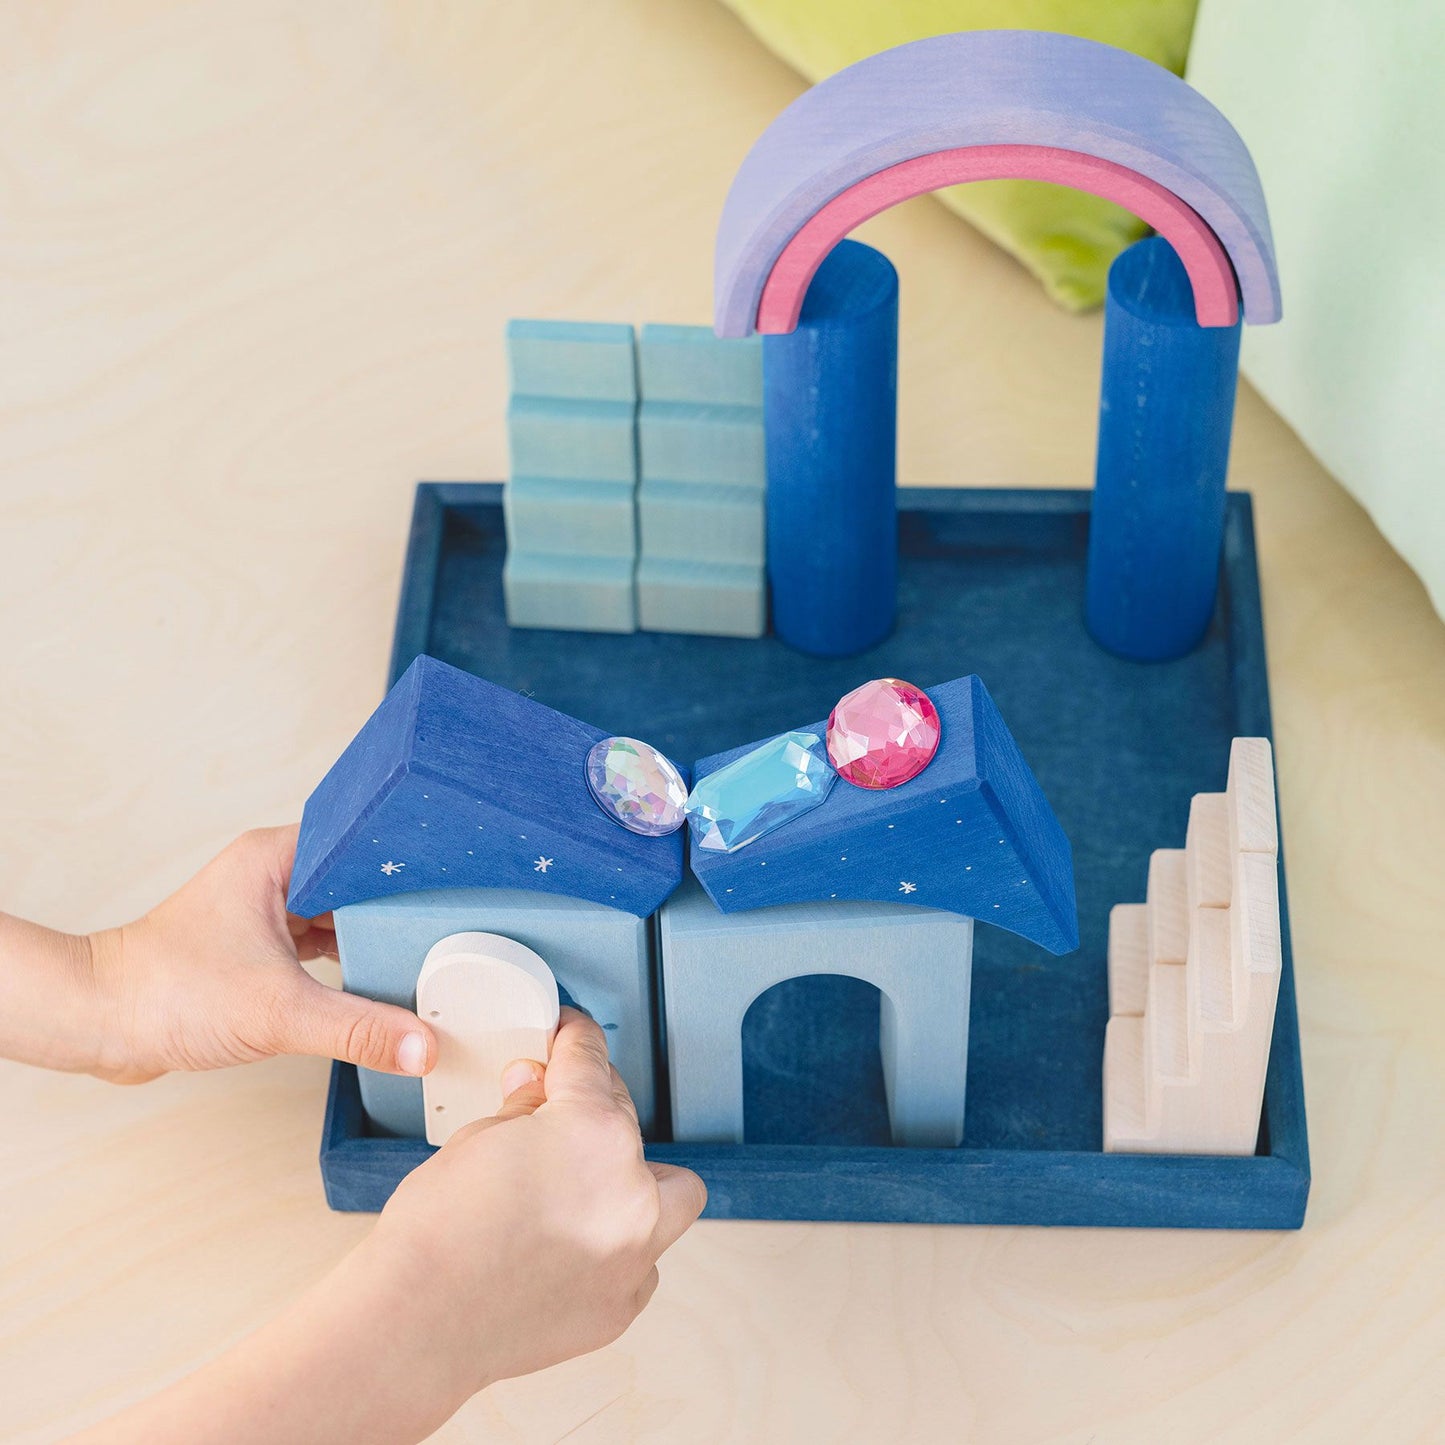 Building World Polar Light | Small World Playset | Wooden Toys for Kids | Open-Ended Play